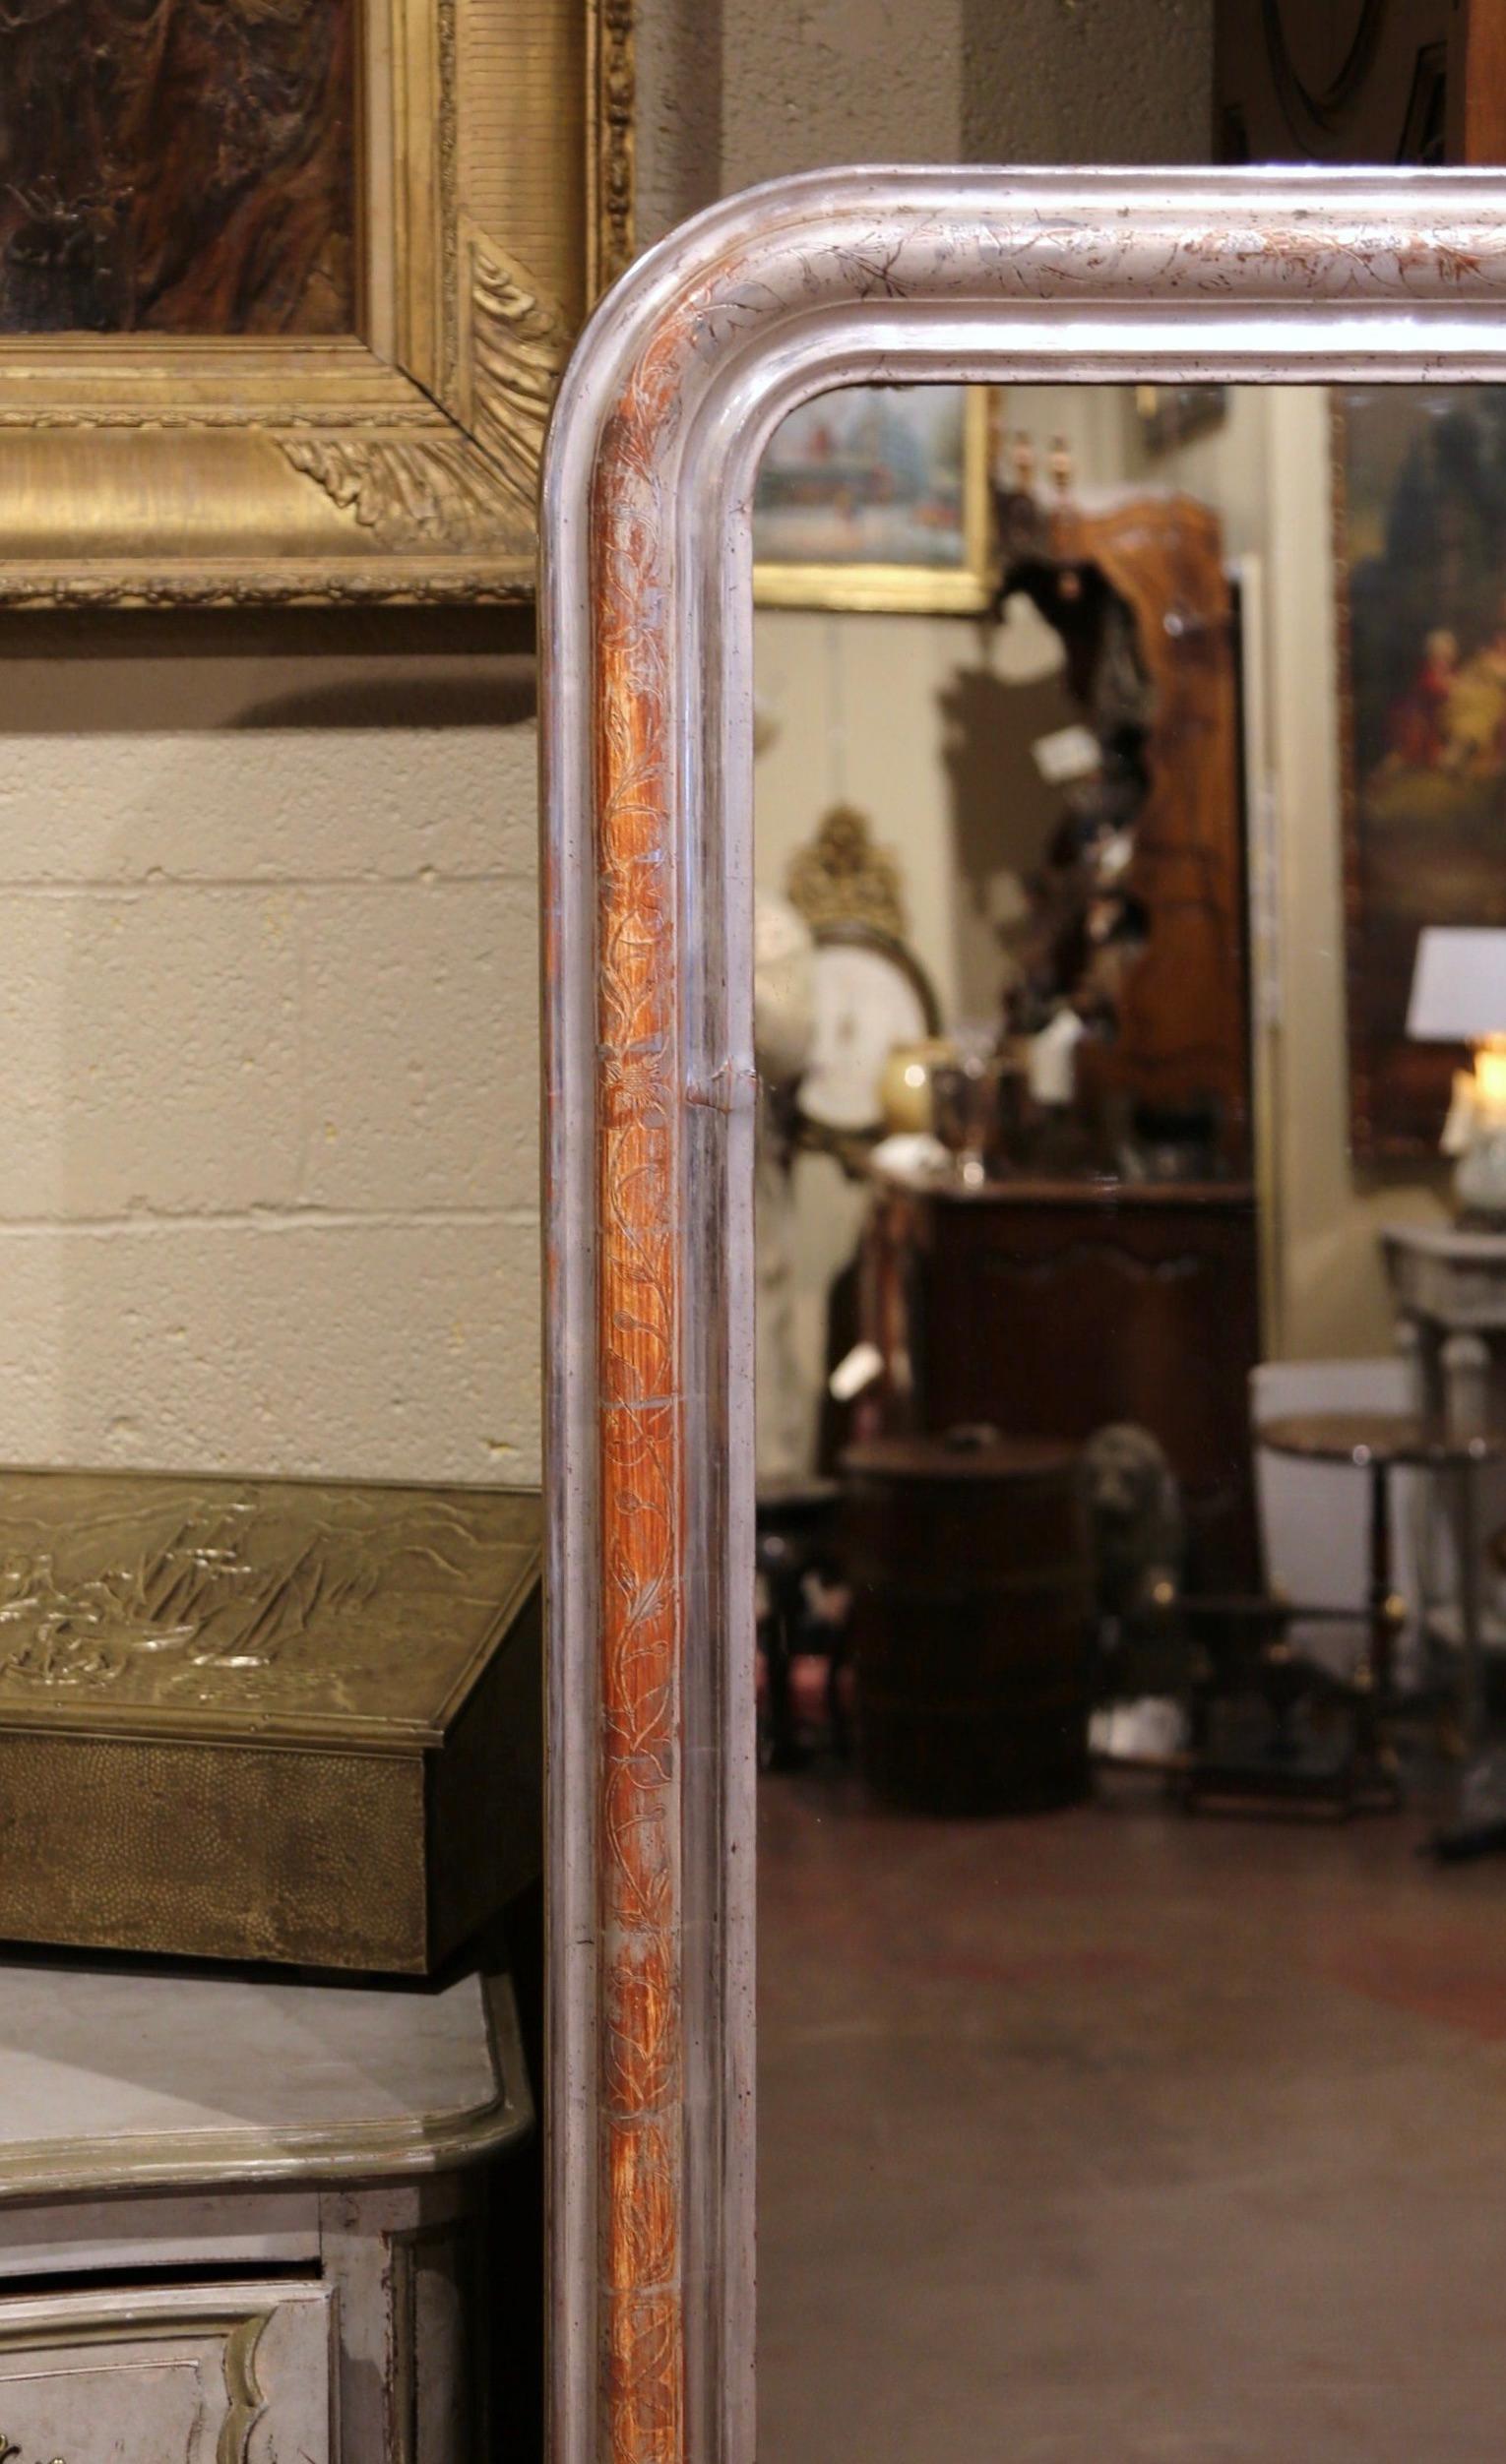 Crafted in the Burgundy region of France circa 1860, the 6 foot tall antique frame has traditional lines with rounded corners and is decorated with a discrete engraved floral decor. The large wall mirror is in excellent condition with the original